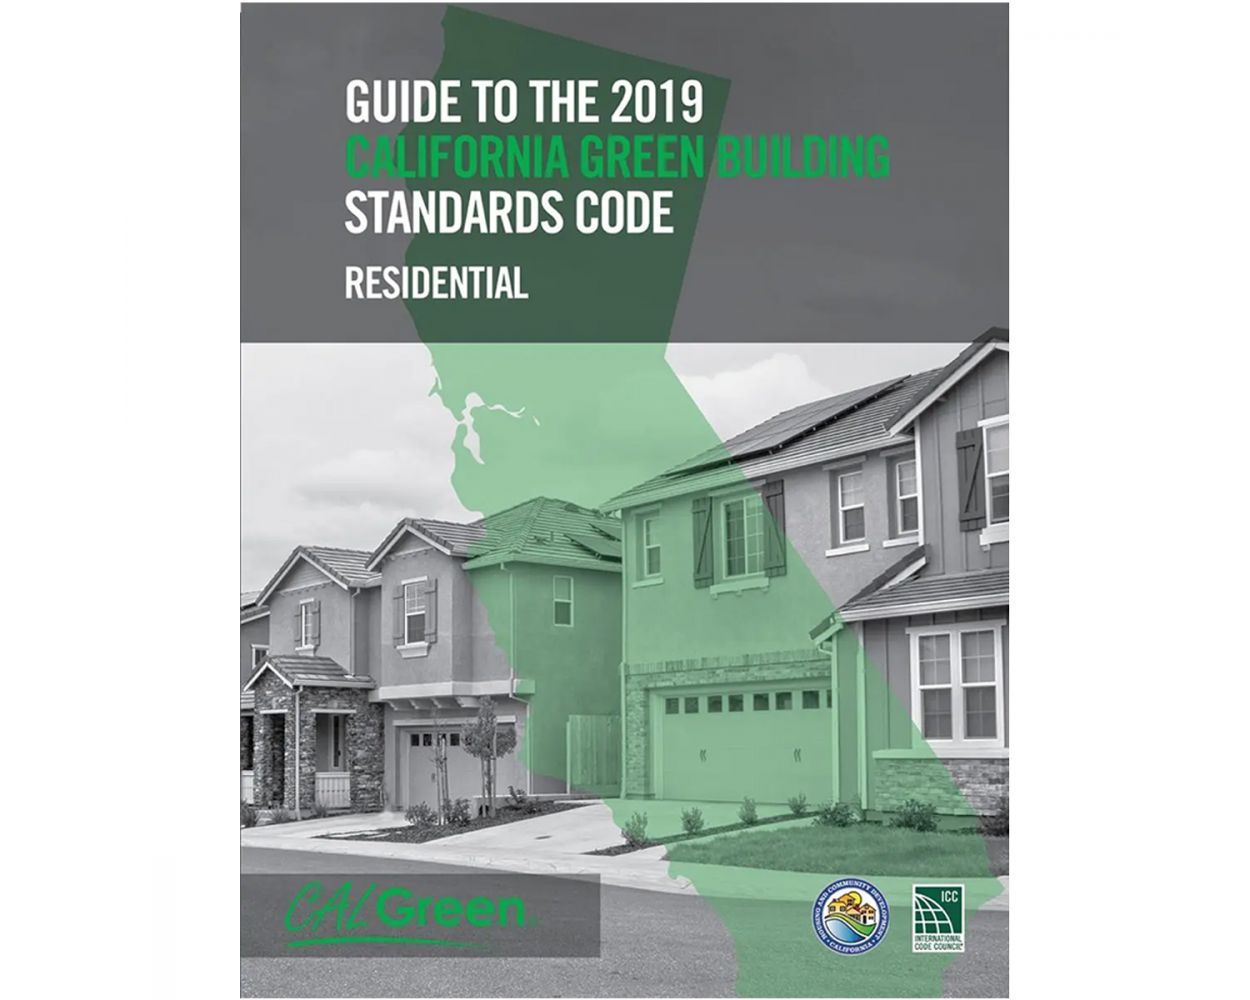 Guide to the 2019 California Green Building Standards Code Residential